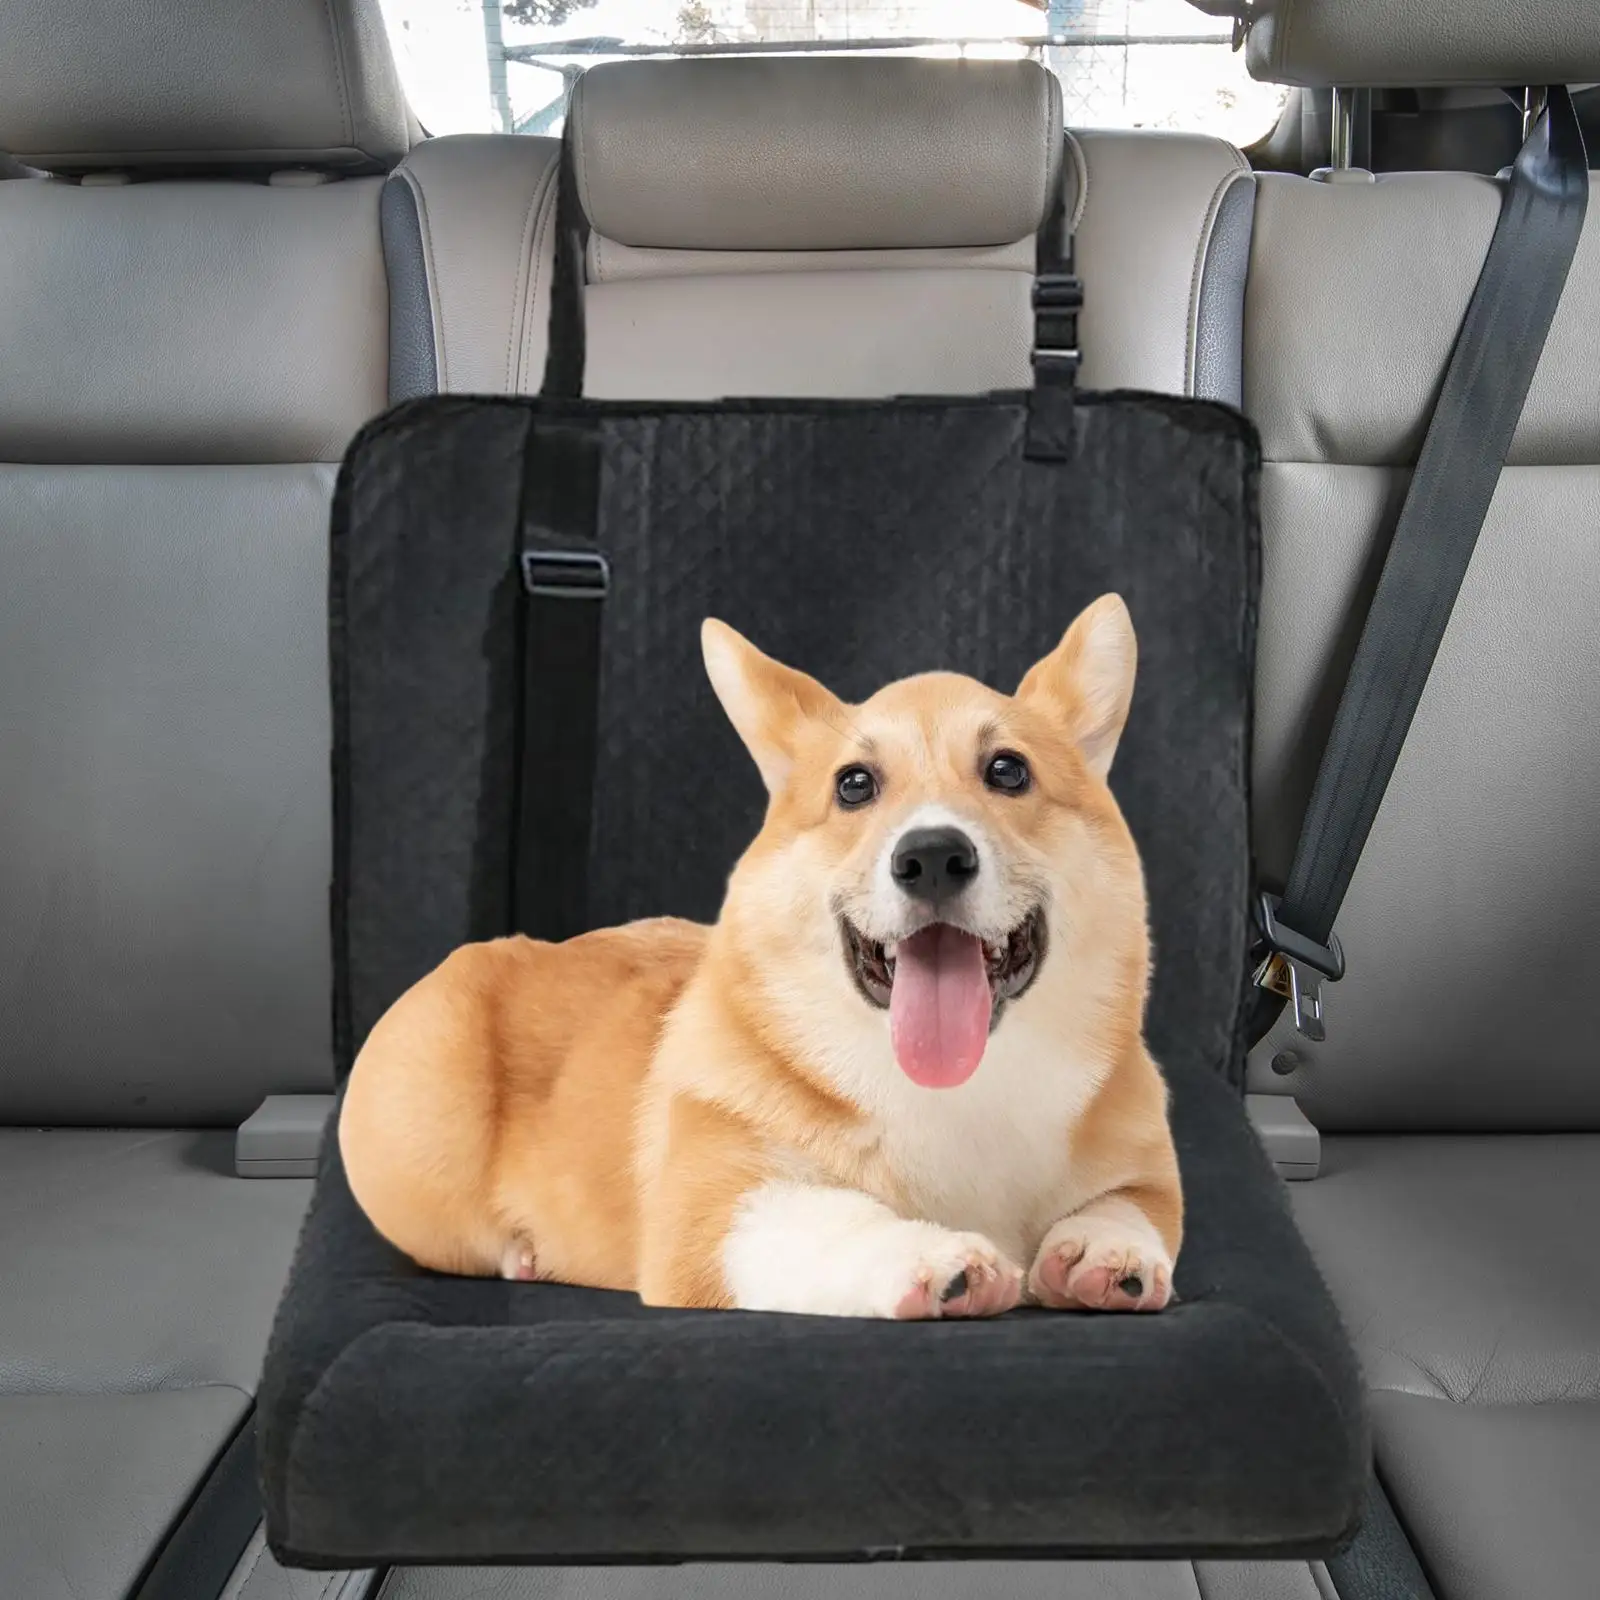 Dog Car Seat Booster Seat Portable Safety Leash Non Slip Pet Carrier Bed Arm Rest Washable Puppy Carrier Seat Kennel for Outdoor